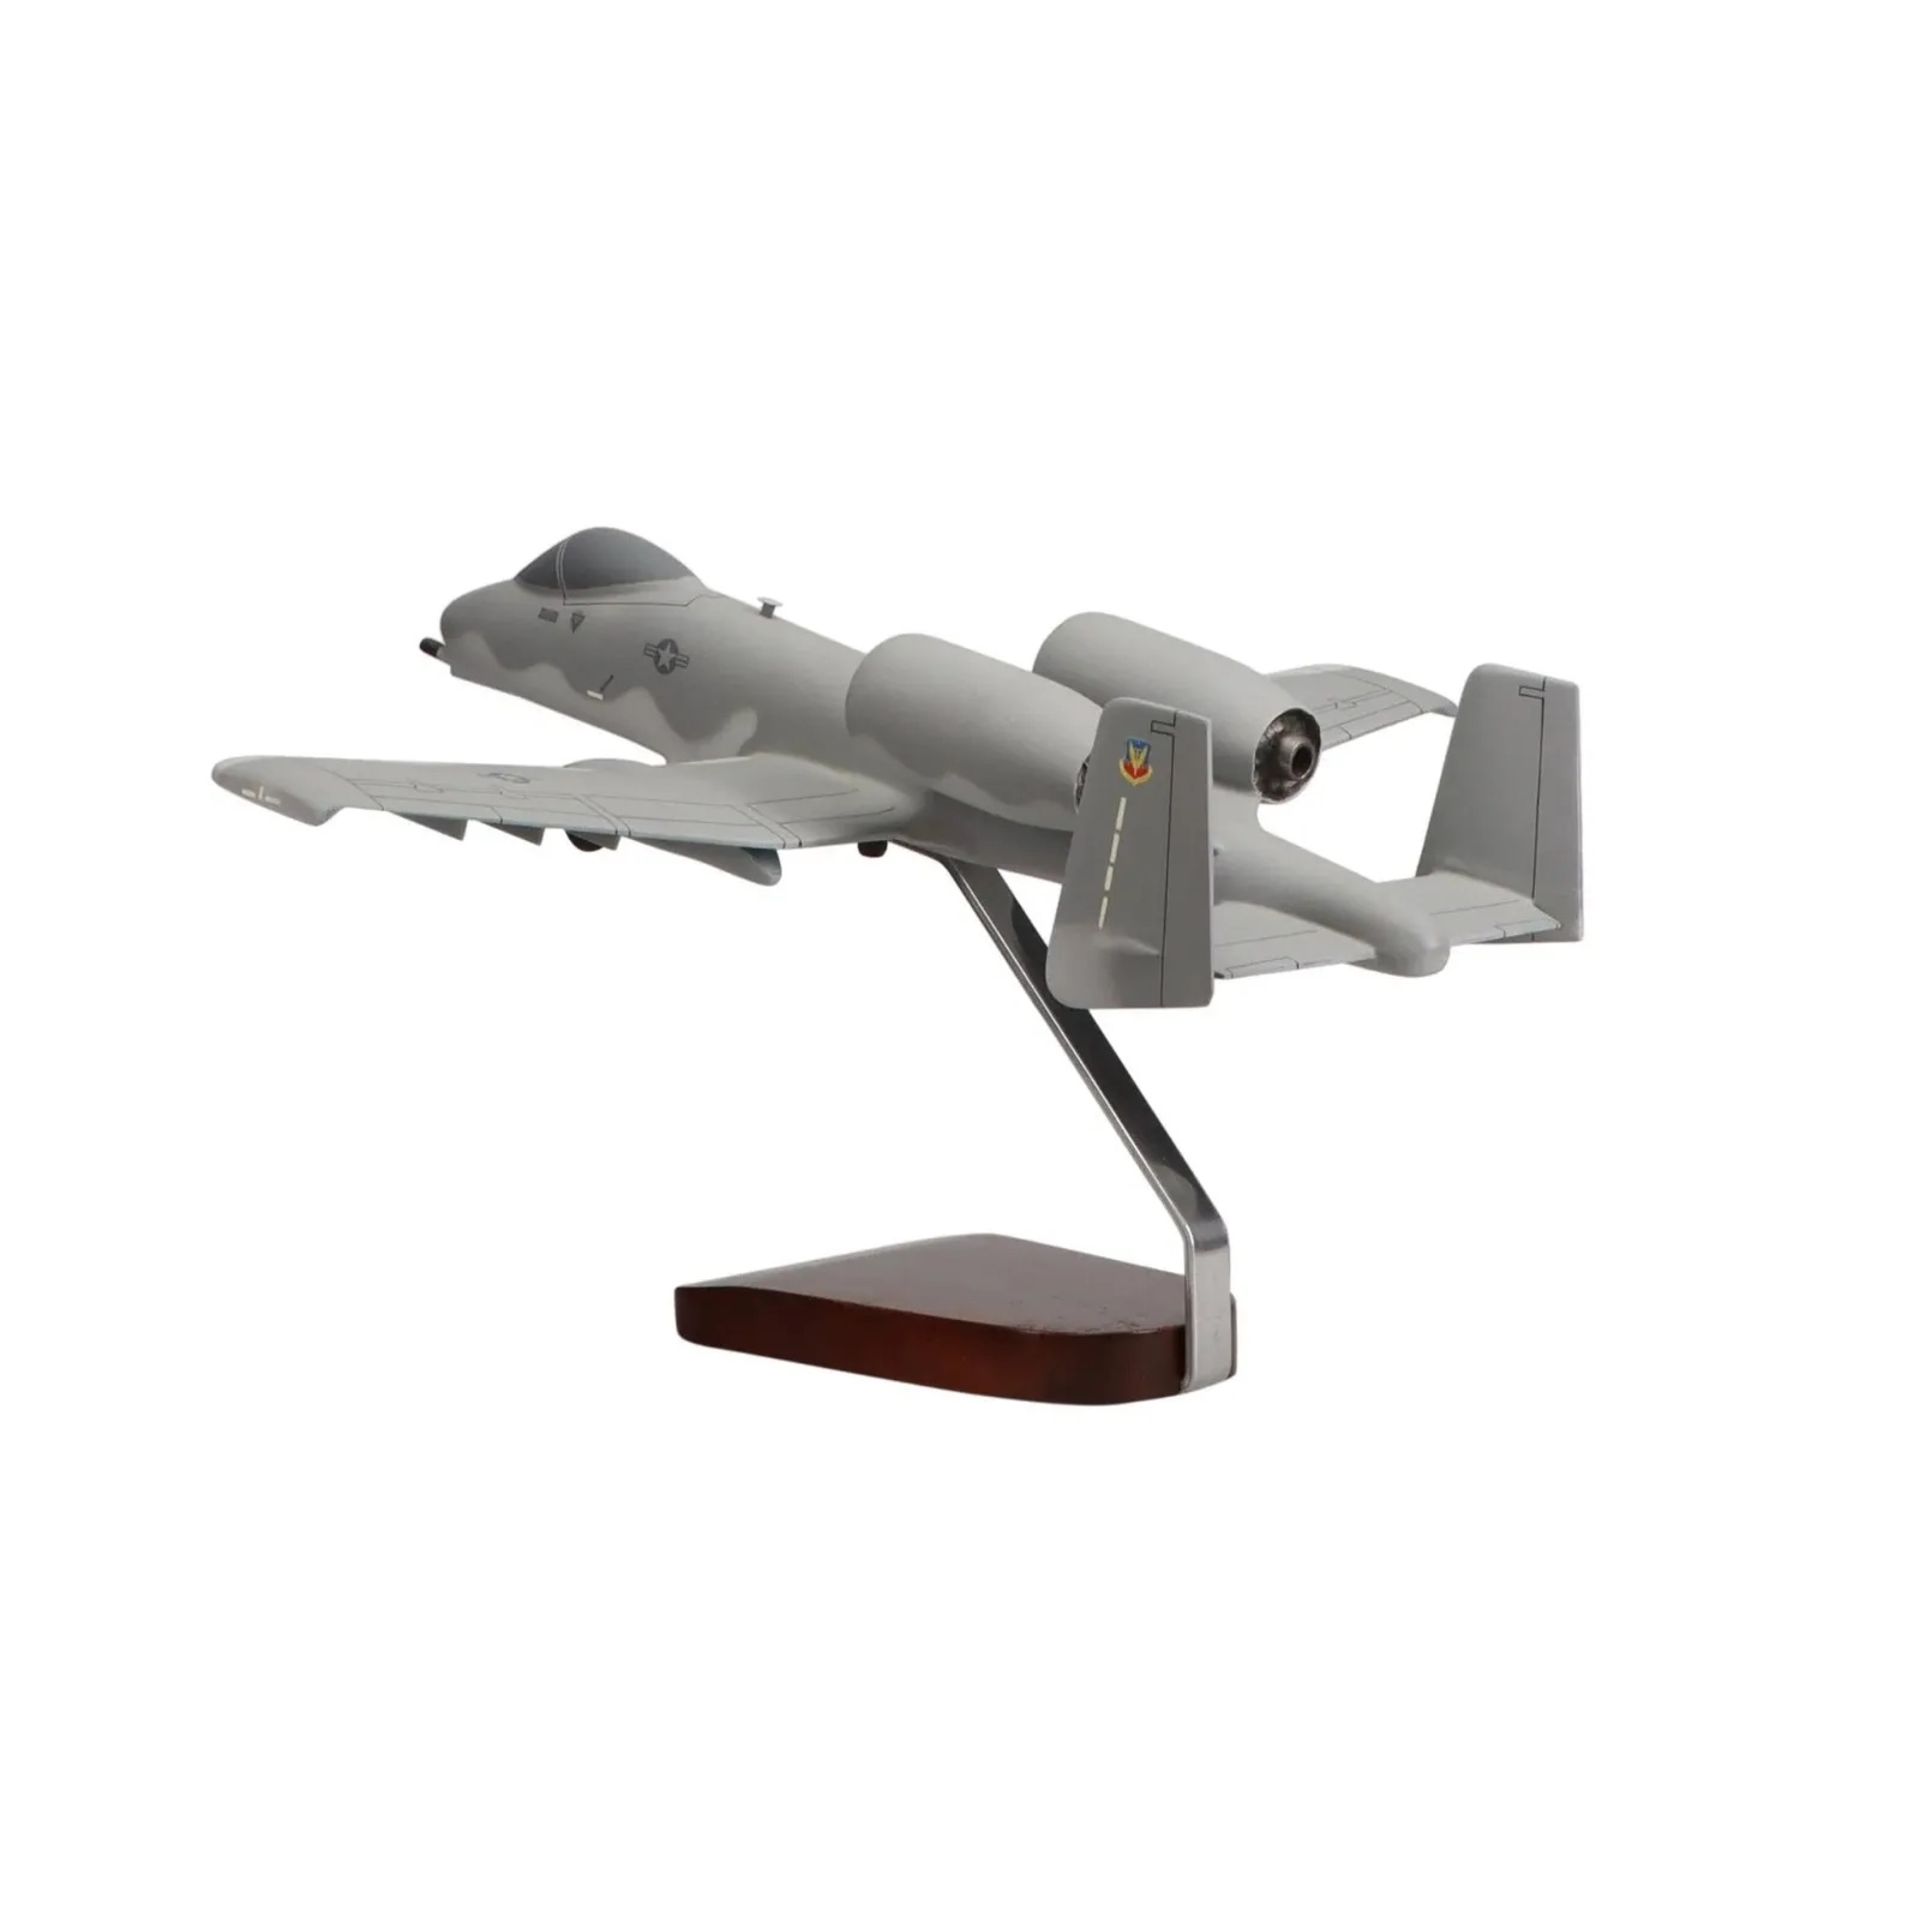 A10 Warthog Scale Model - Image 2 of 4